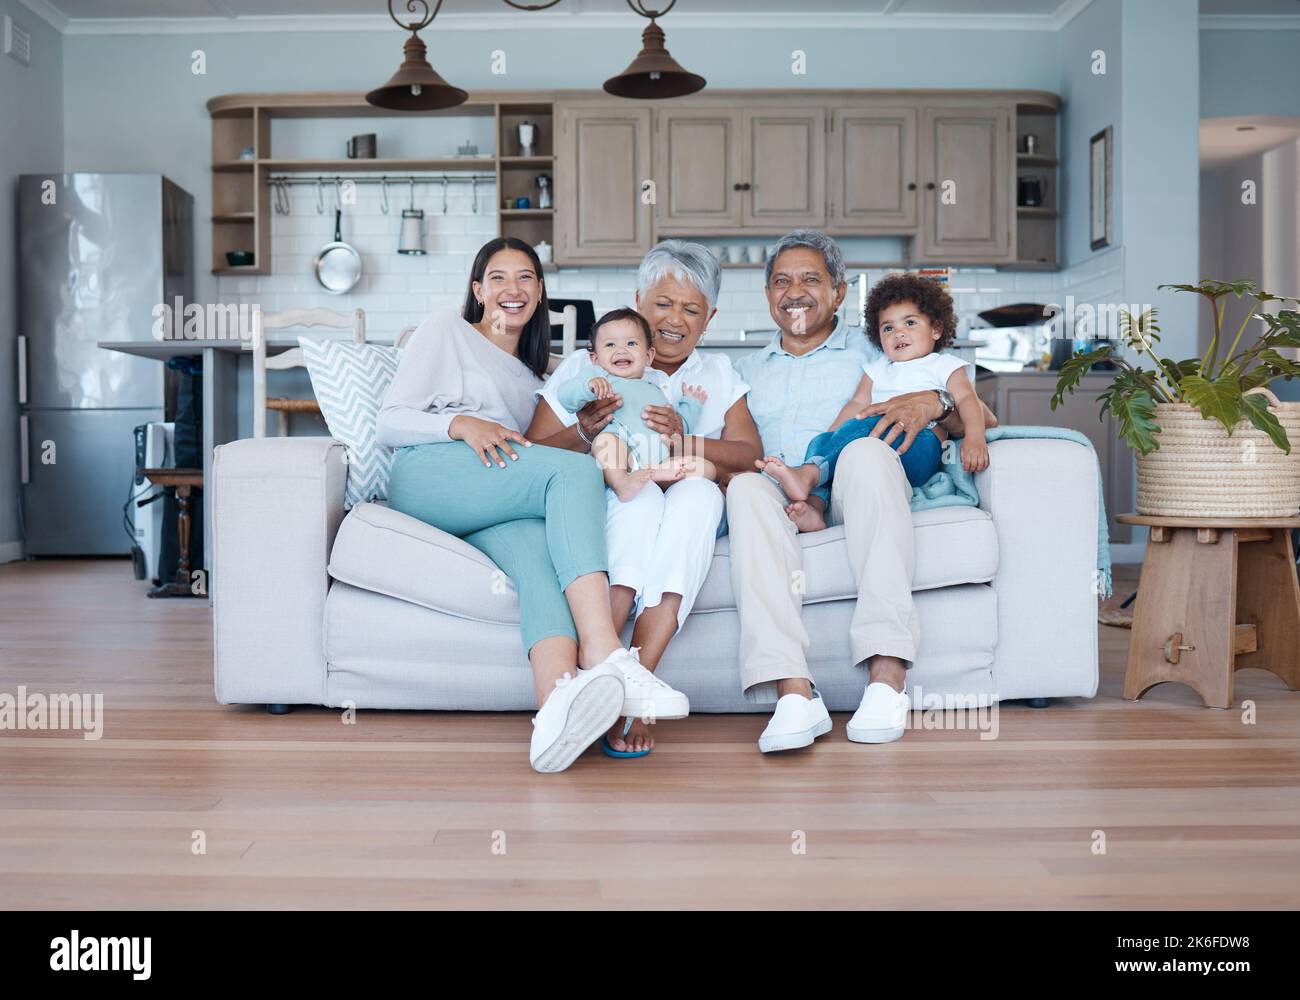 Always ahead of the rest. a beautiful family bonding on a sofa at home. Stock Photo